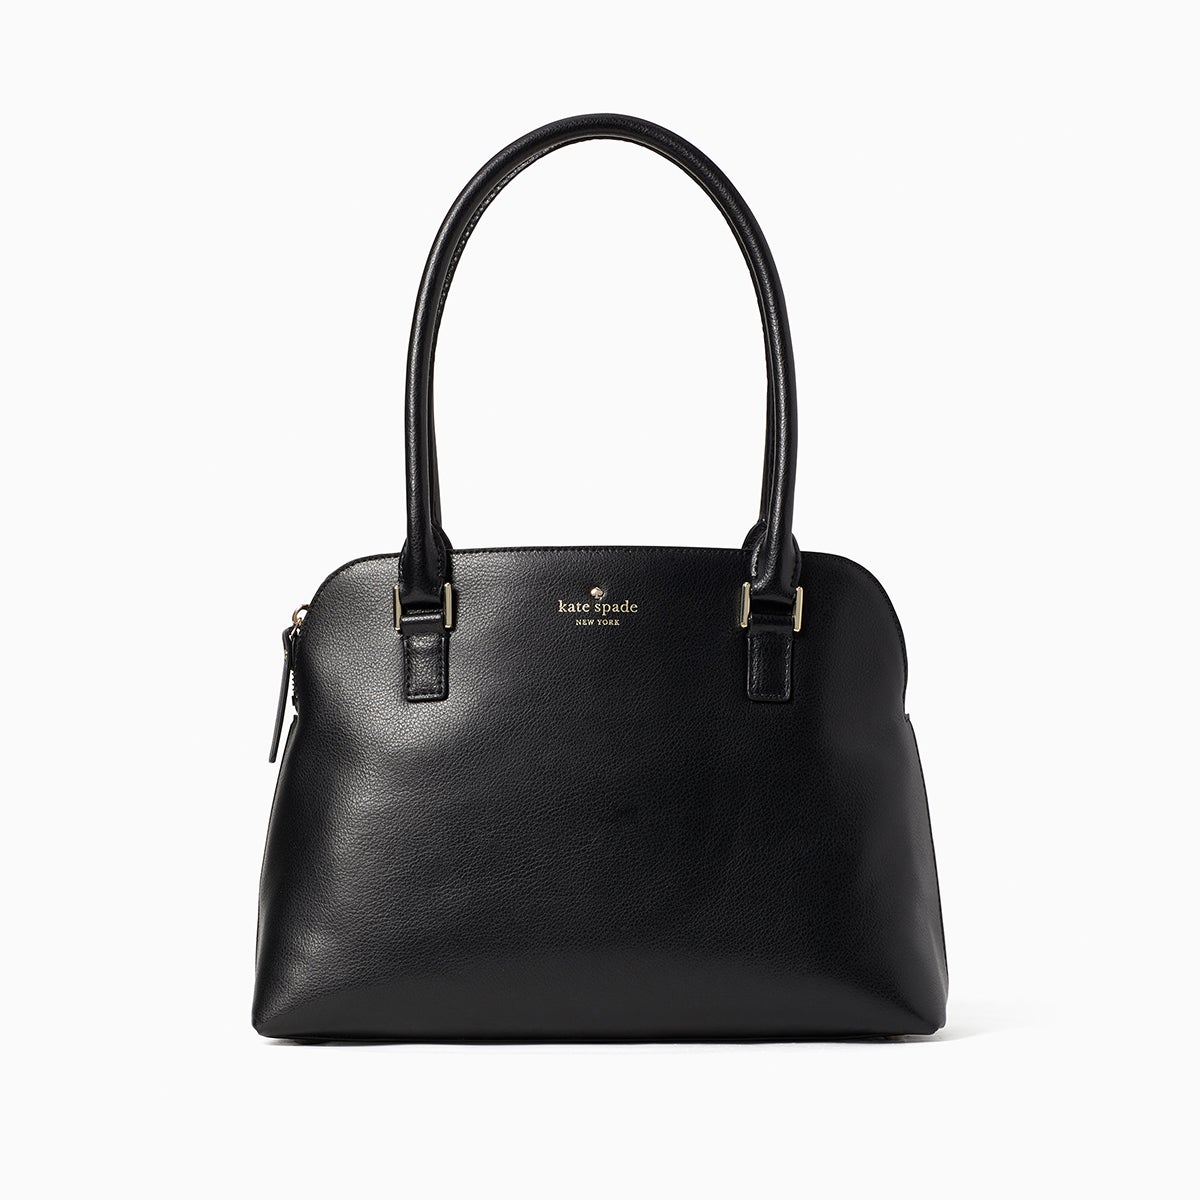 Kate Spade Surprise has handbags, shoes, clothing deals up to 75